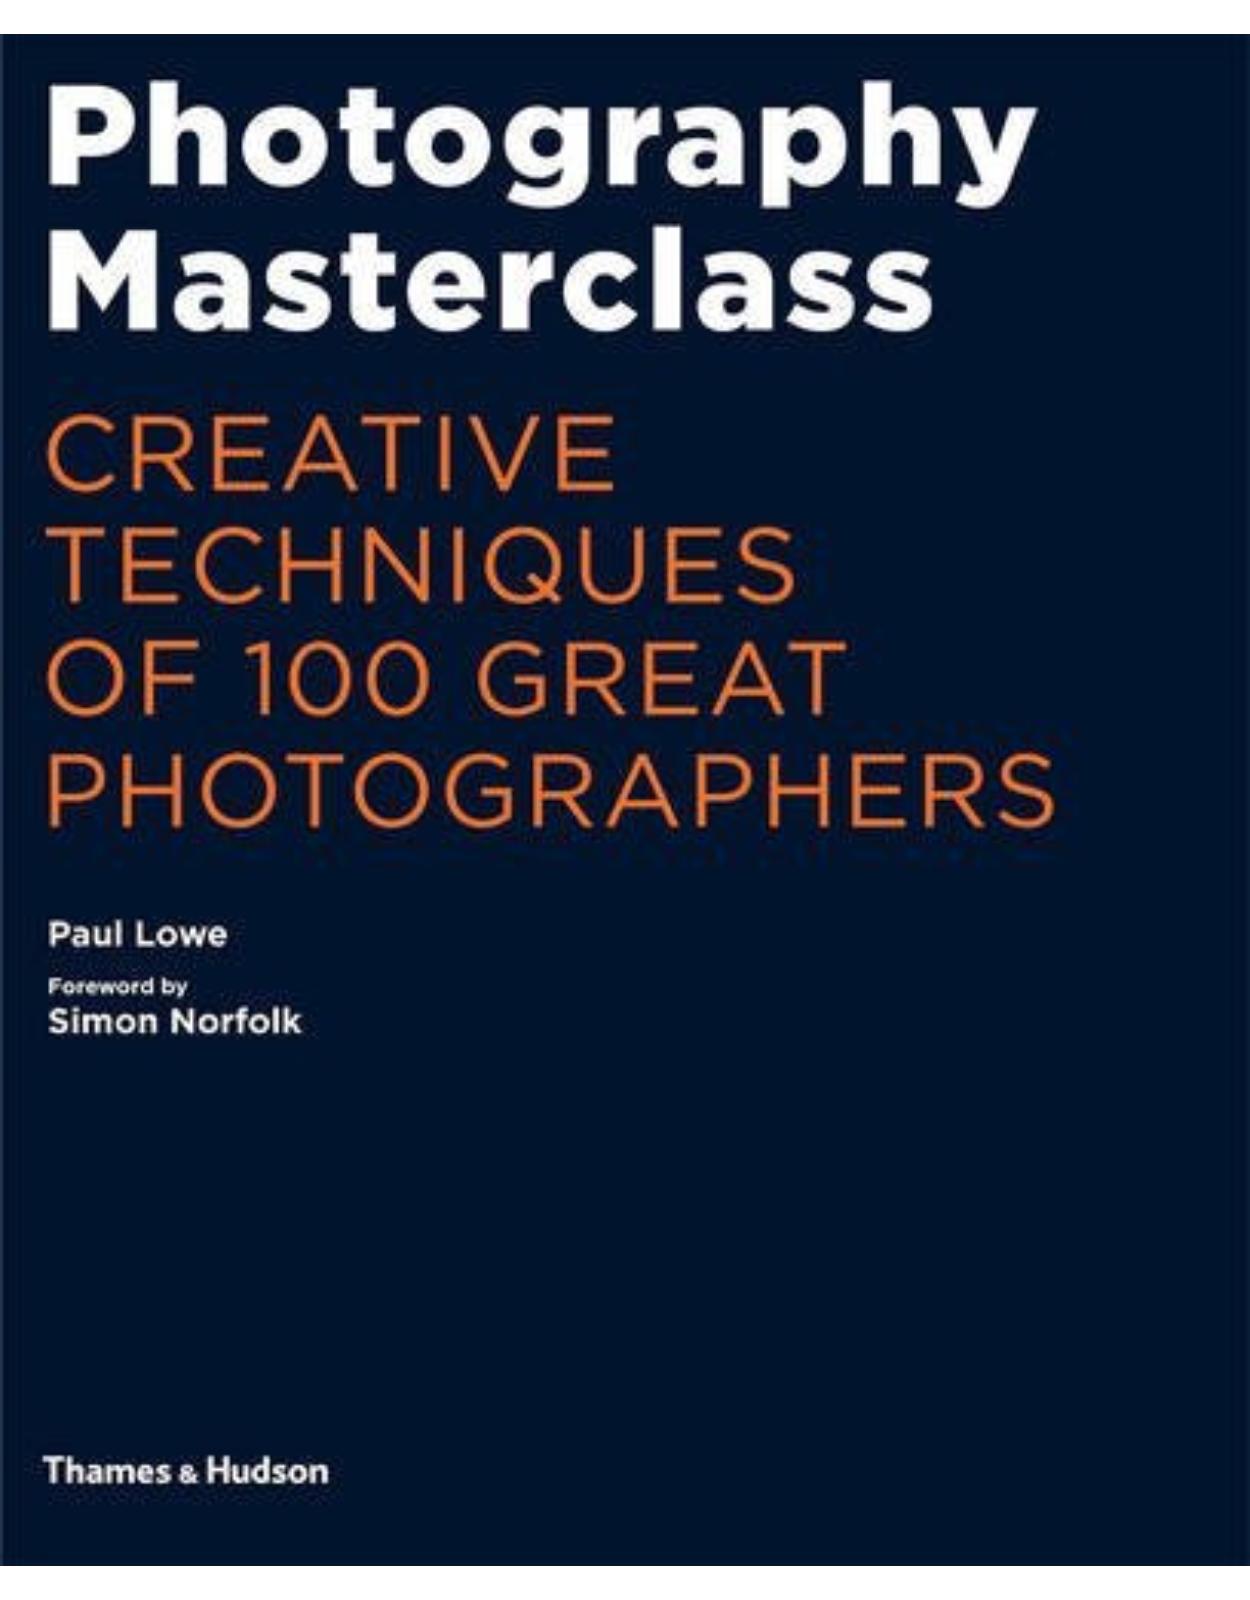 Photography Masterclass: Creative Techniques of 100 Great Photographers